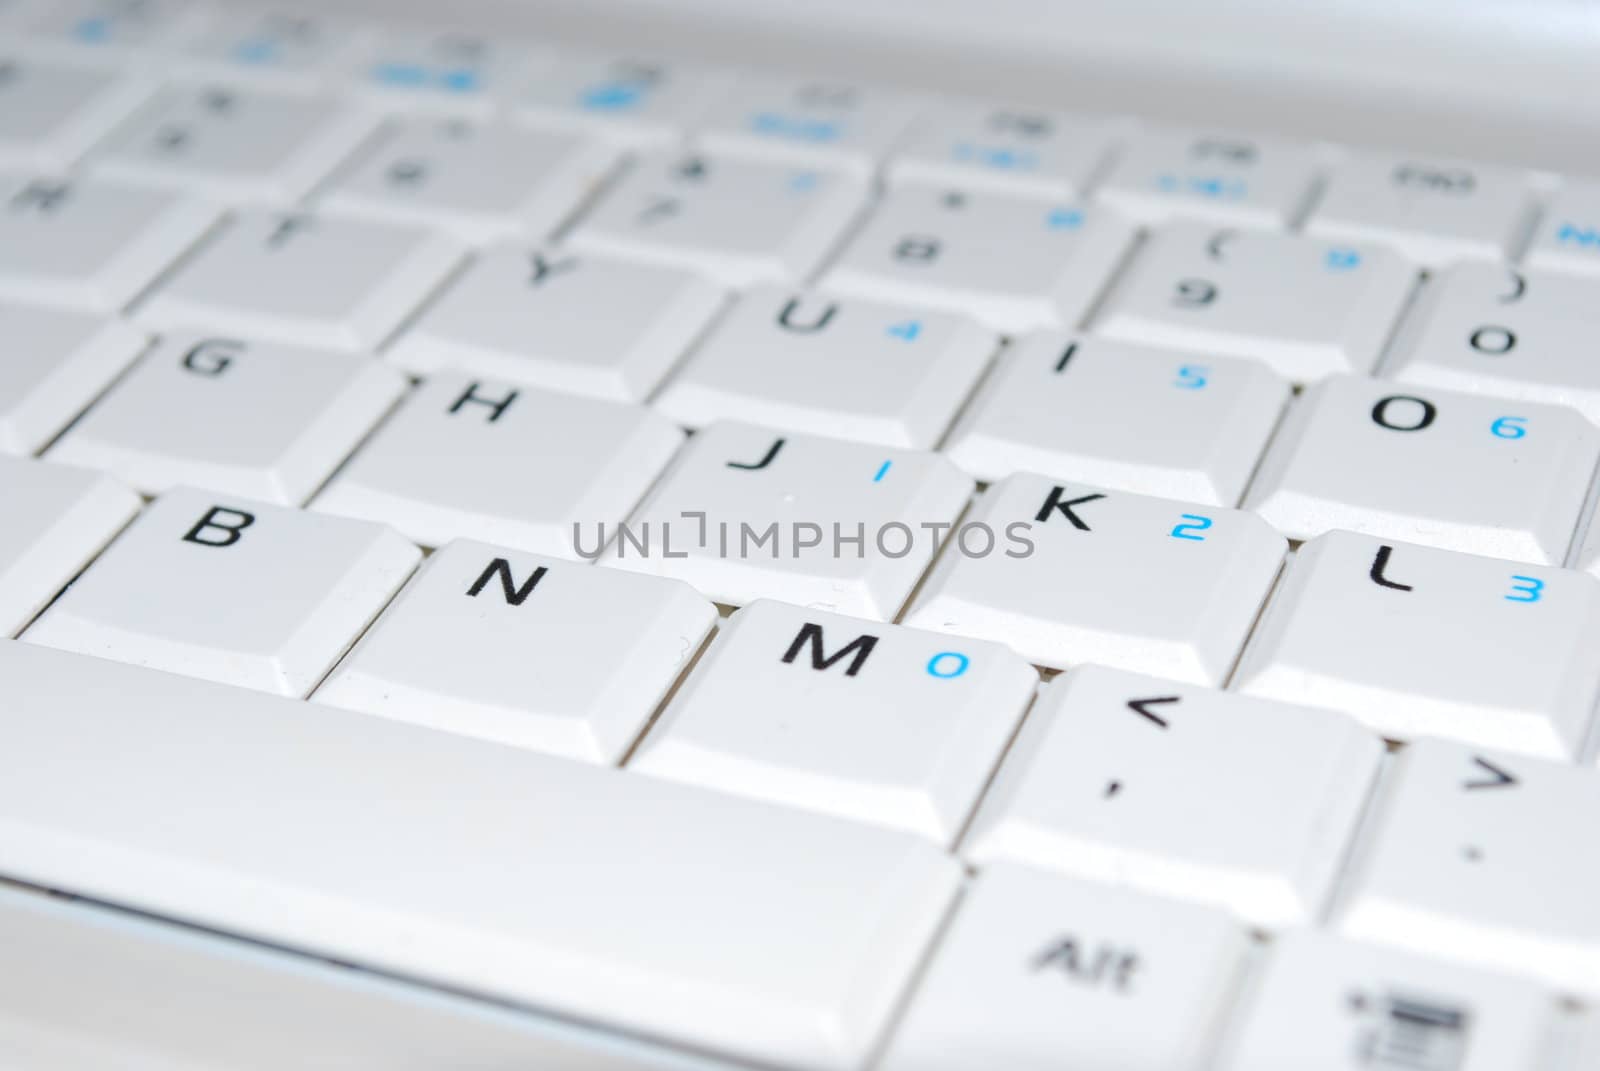 photo of a close up on a white us keyboard